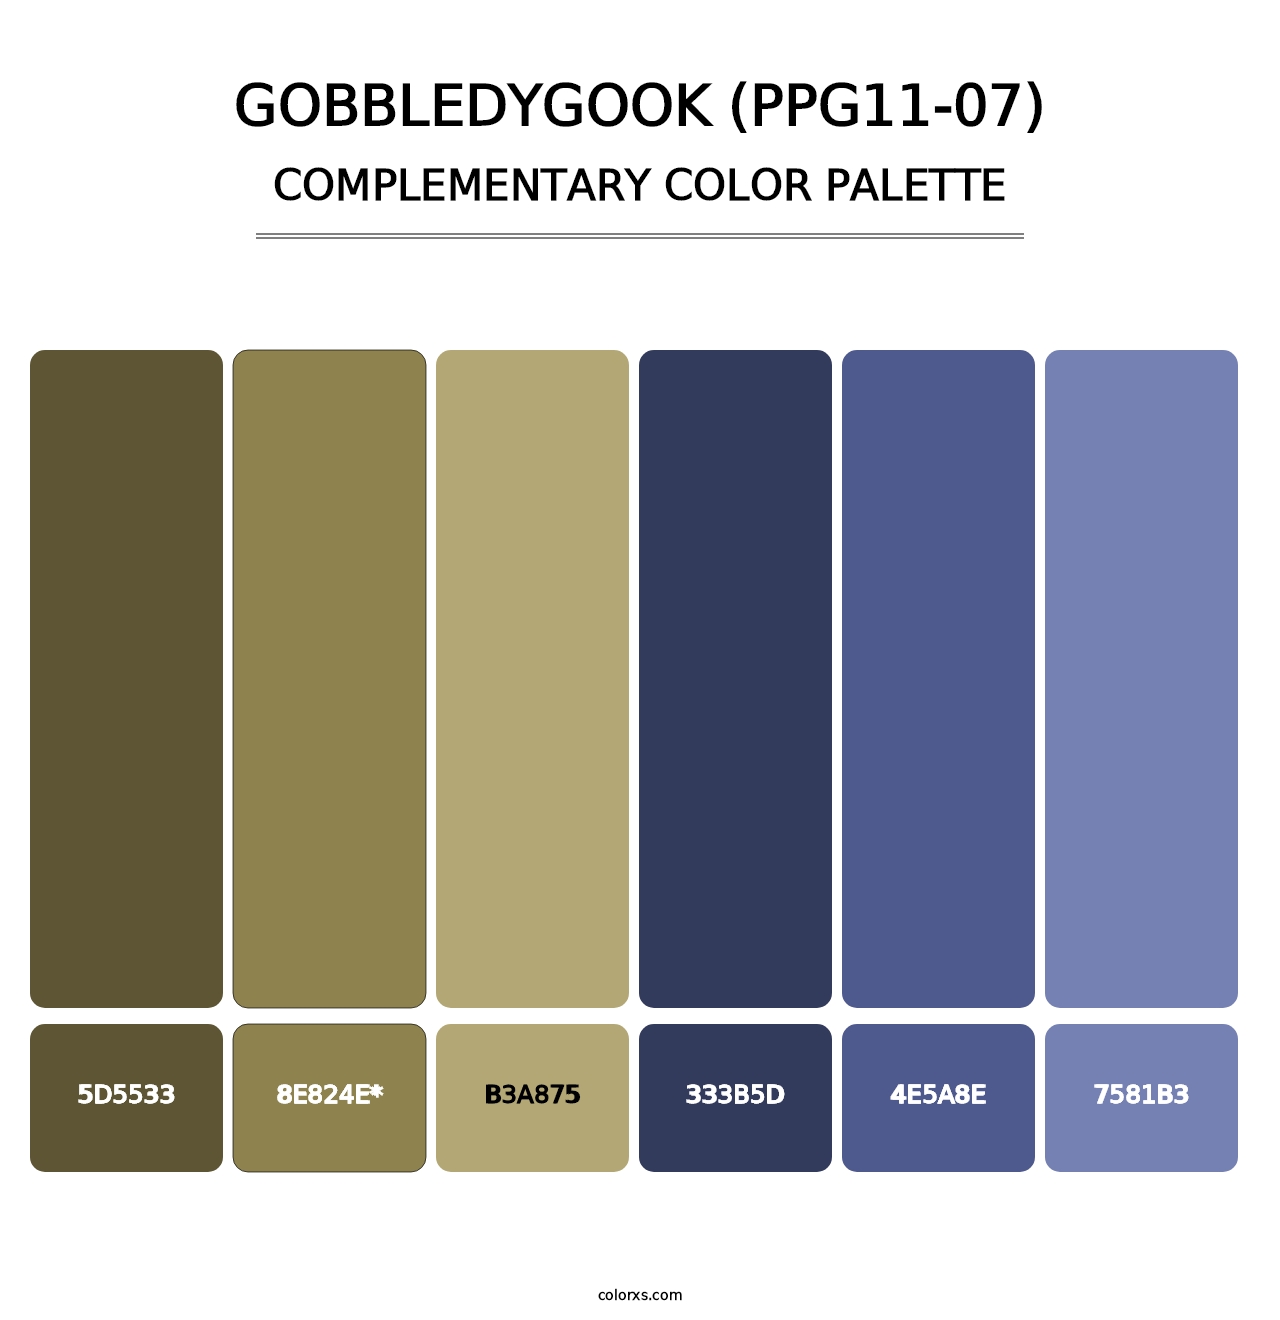 Gobbledygook (PPG11-07) - Complementary Color Palette